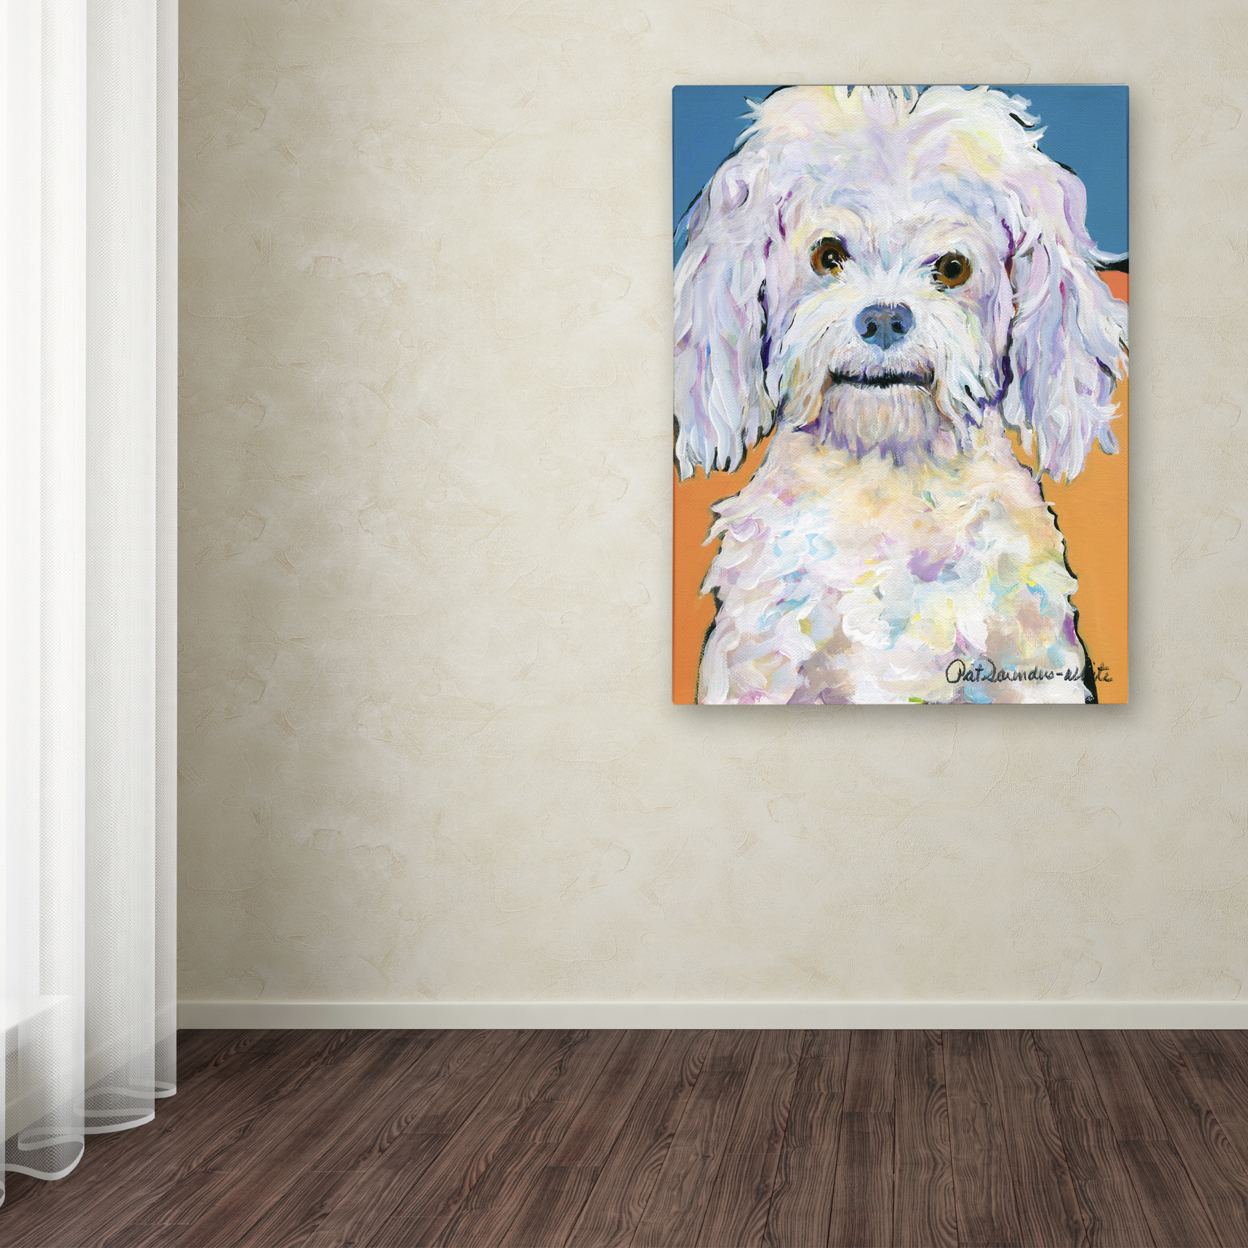 Pat Saunders-White 'Lulu' Canvas Wall Art 35 X 47 Inches